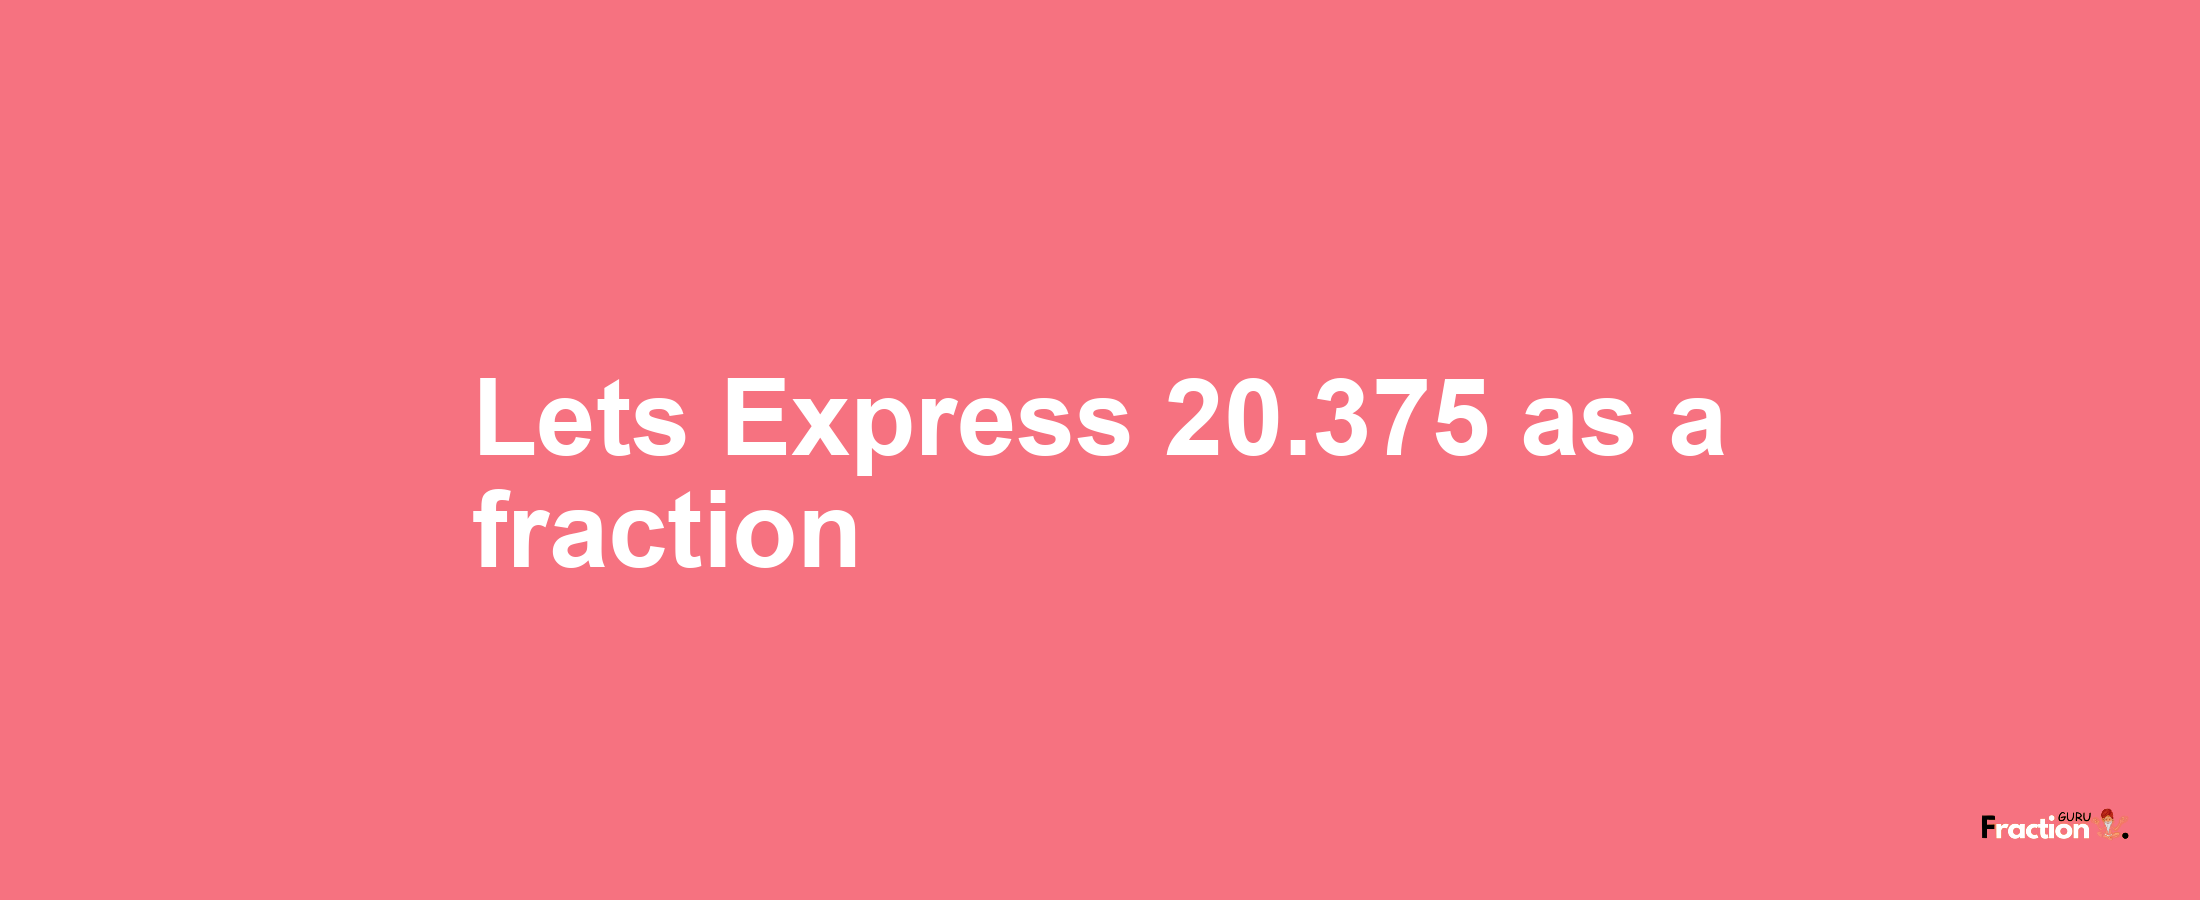 Lets Express 20.375 as afraction